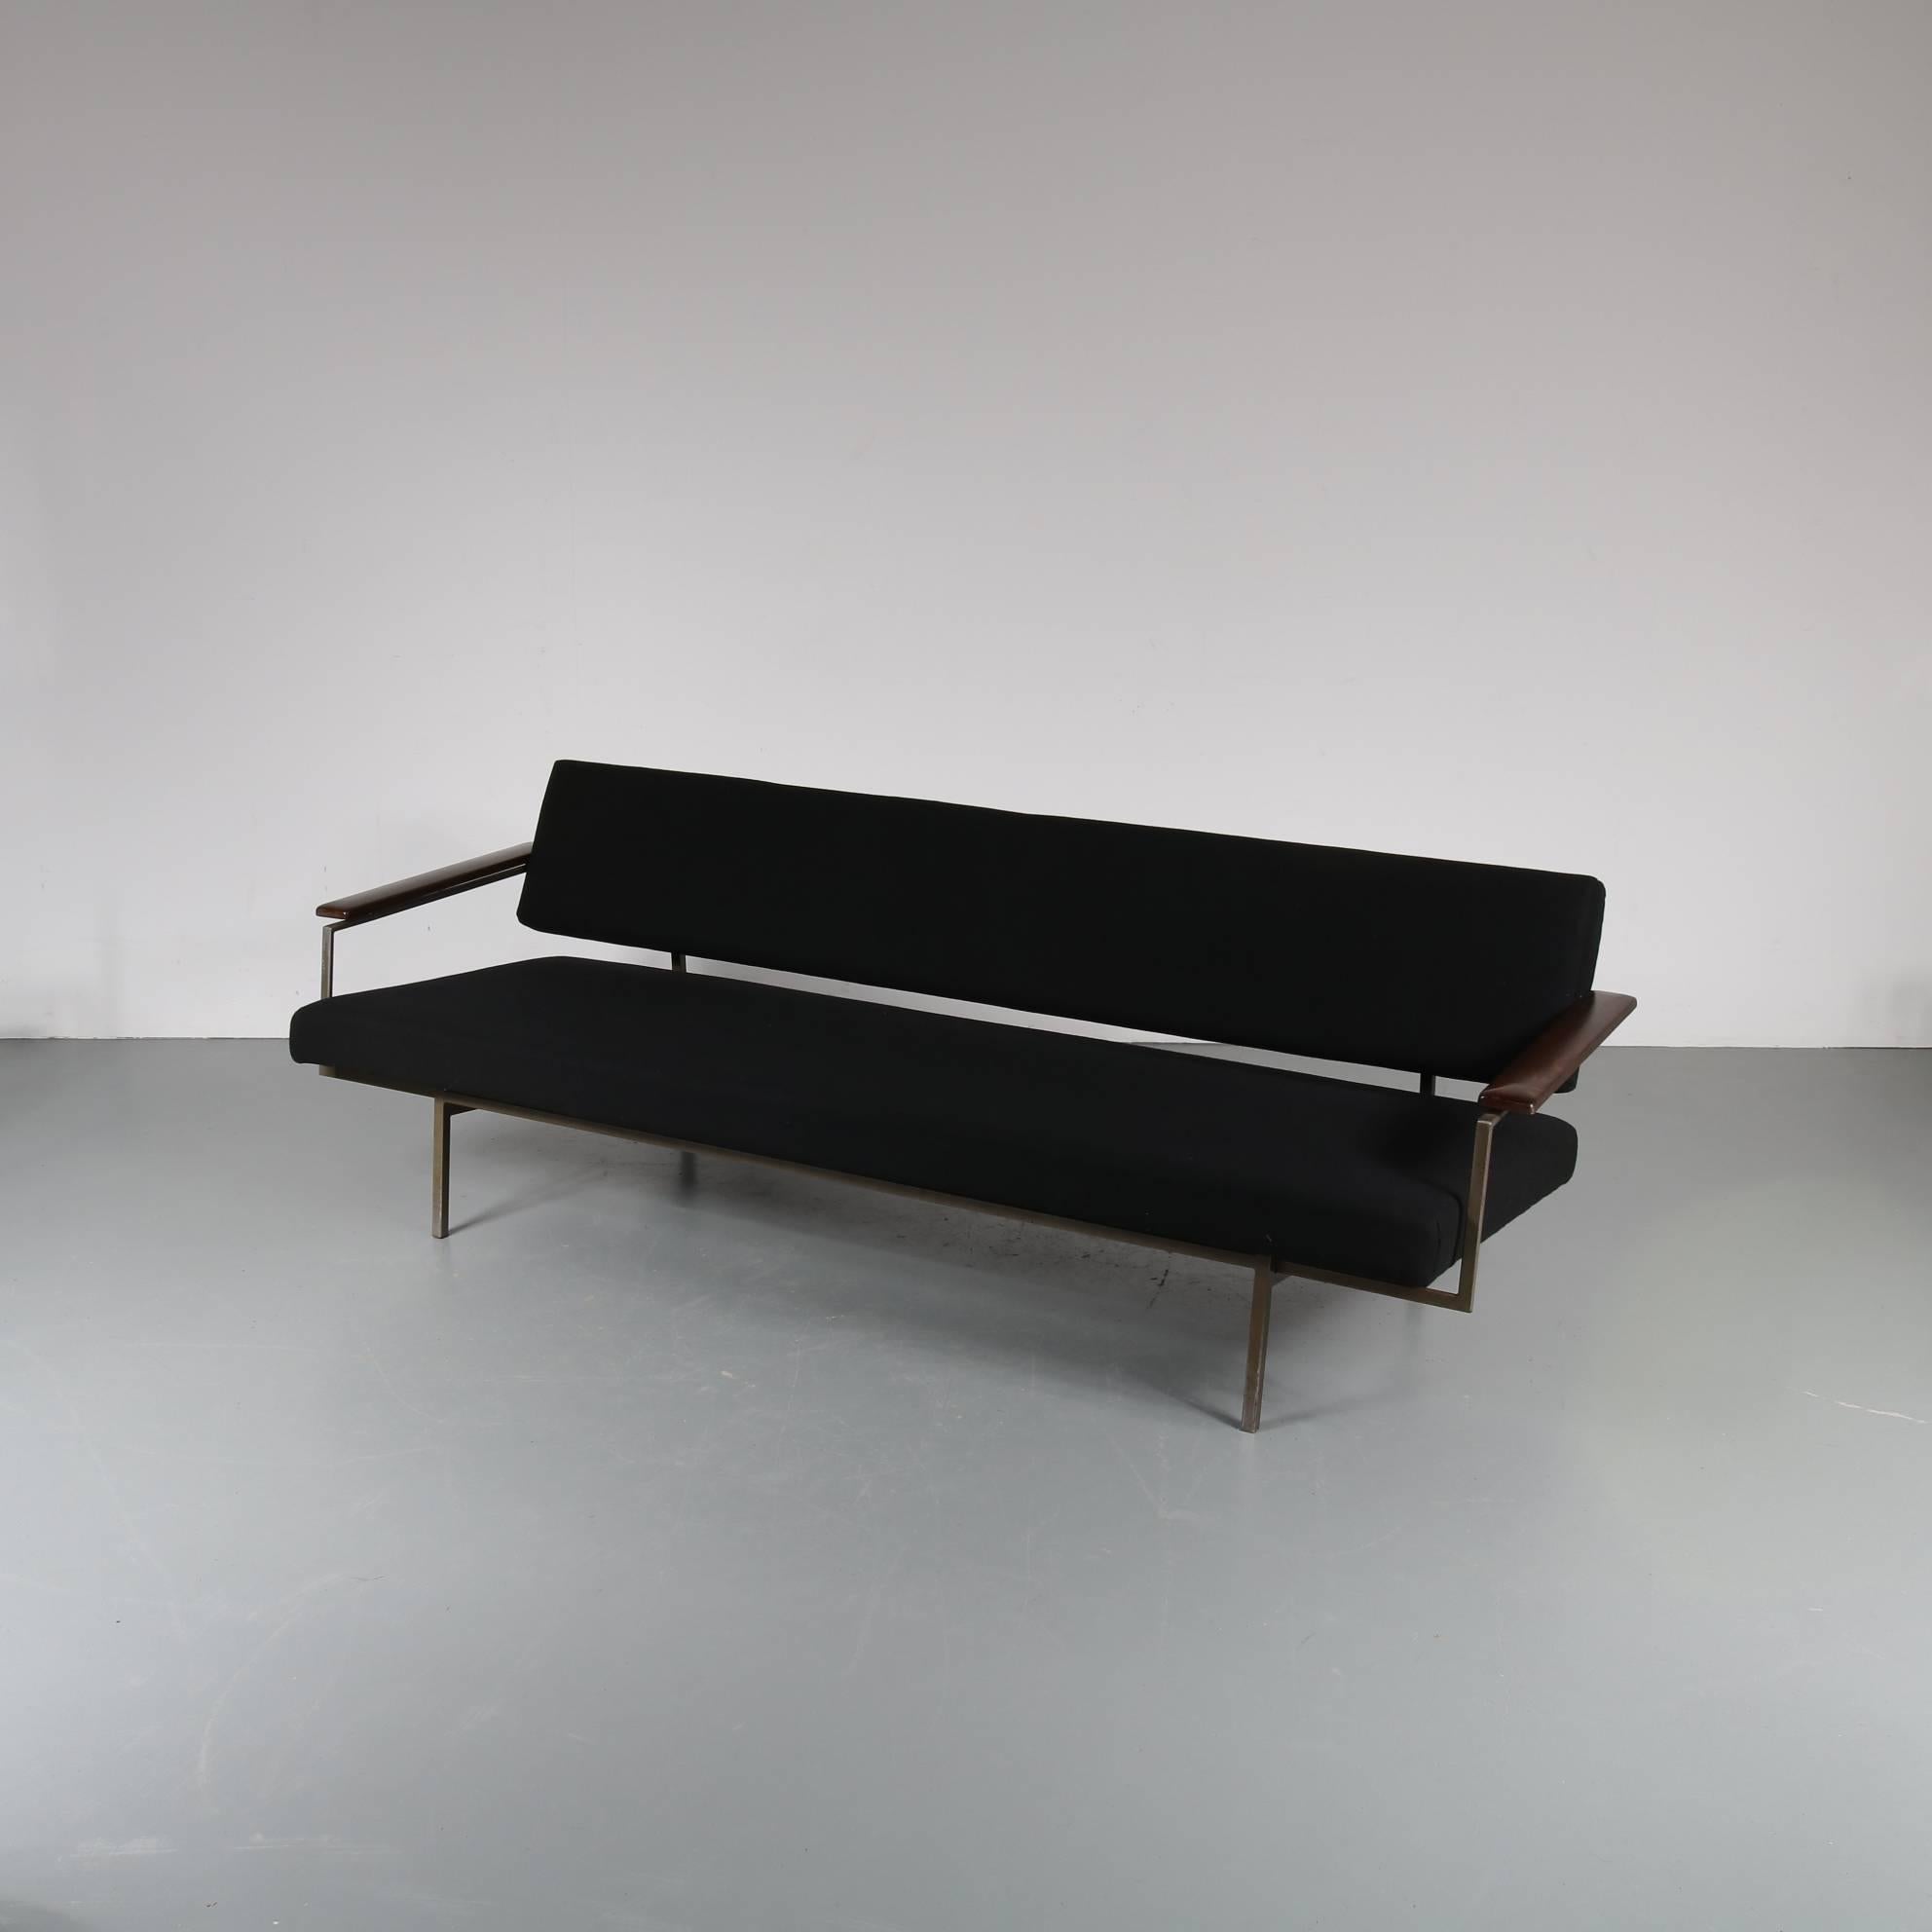 A luxurious sleeping sofa designed by Rob Parry, manufactured by Gelderland (Netherlands) around 1960.

This eye-catching sofa has a beautiful steel base, warm brown wooden armrests and a new black fabric upholstery. This combination of materials